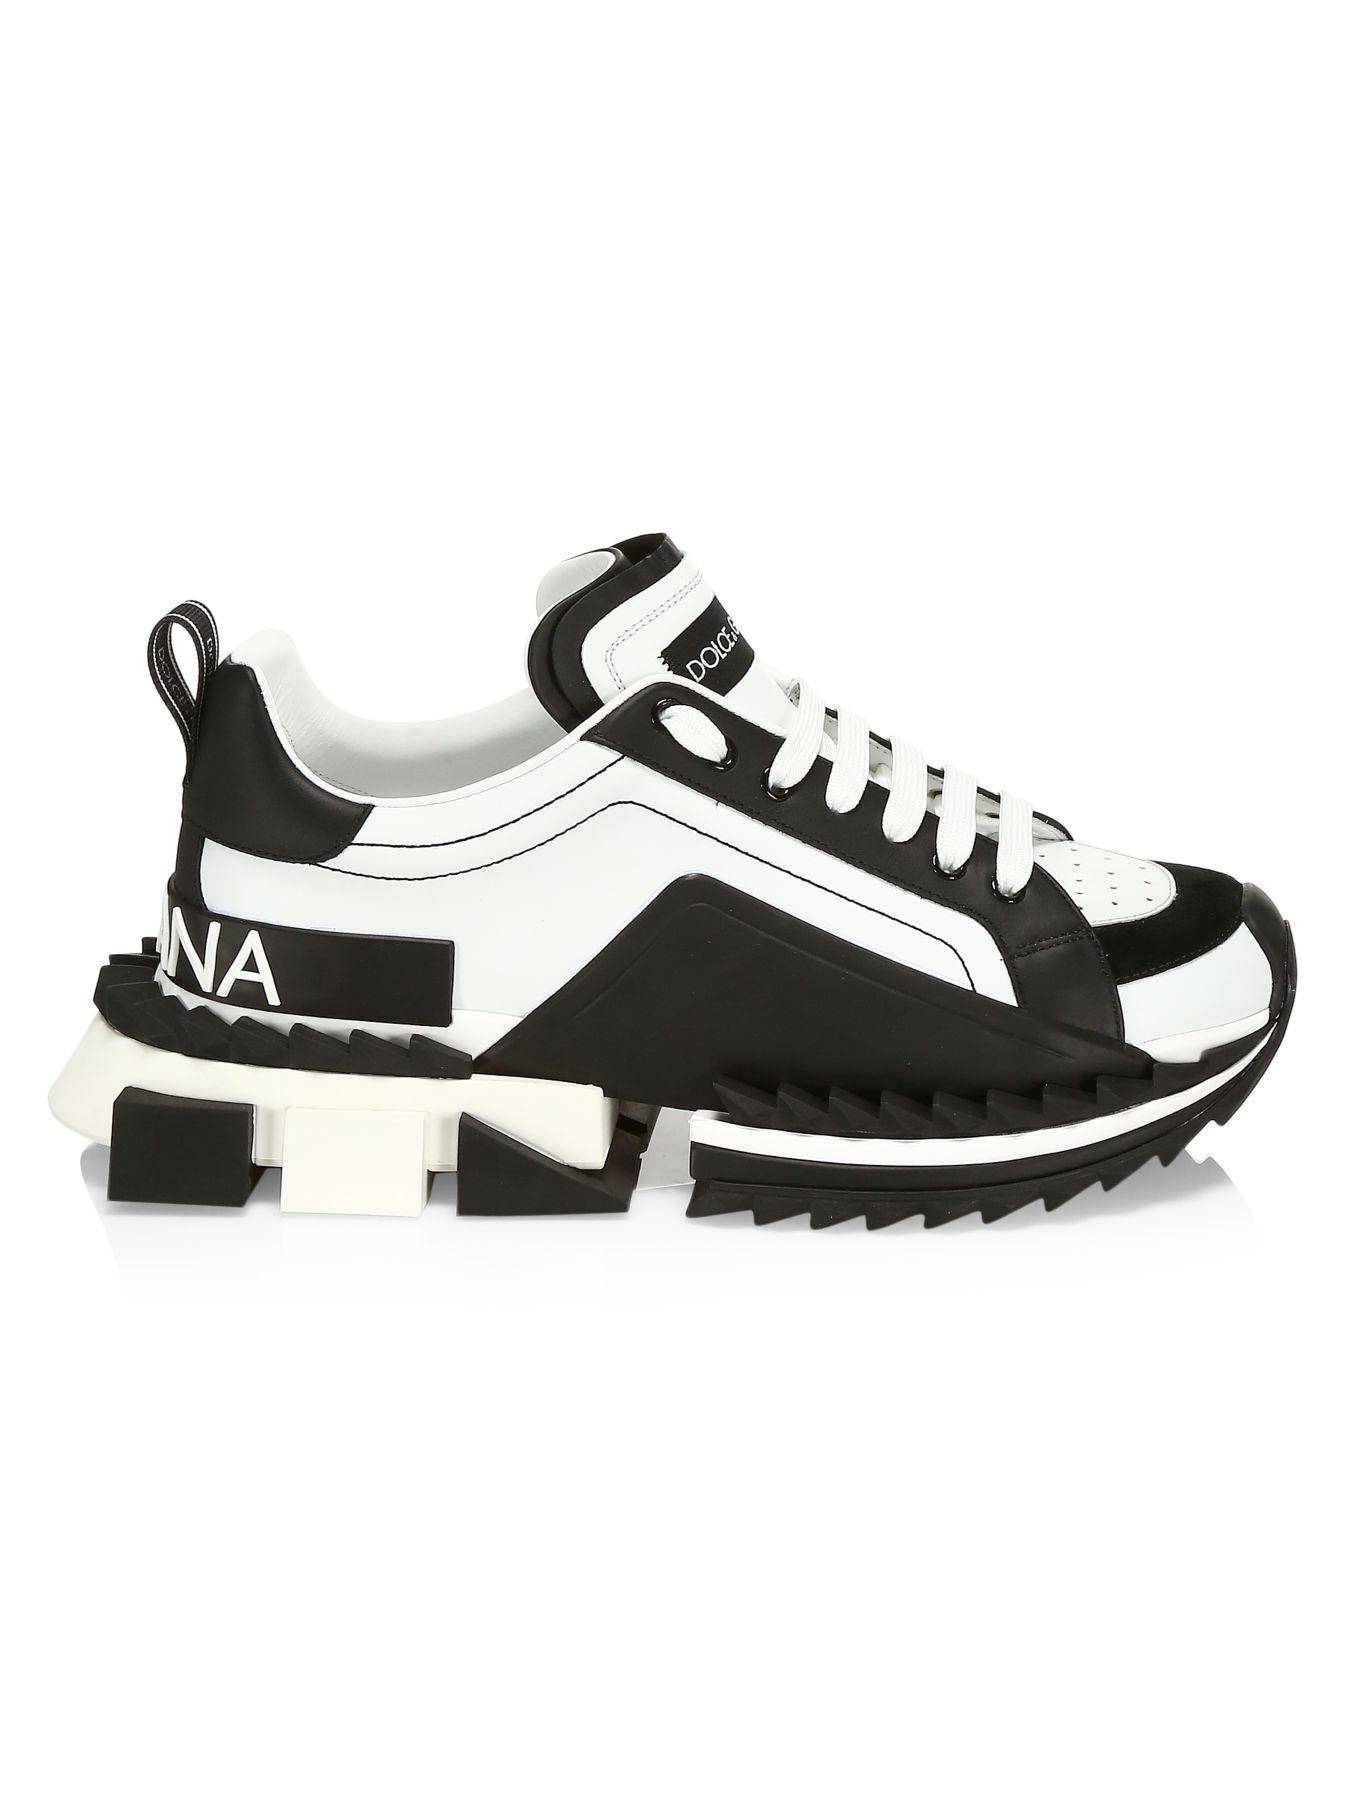 Dolce & Gabbana Leather Super King Chunky Sneakers in White Black ...